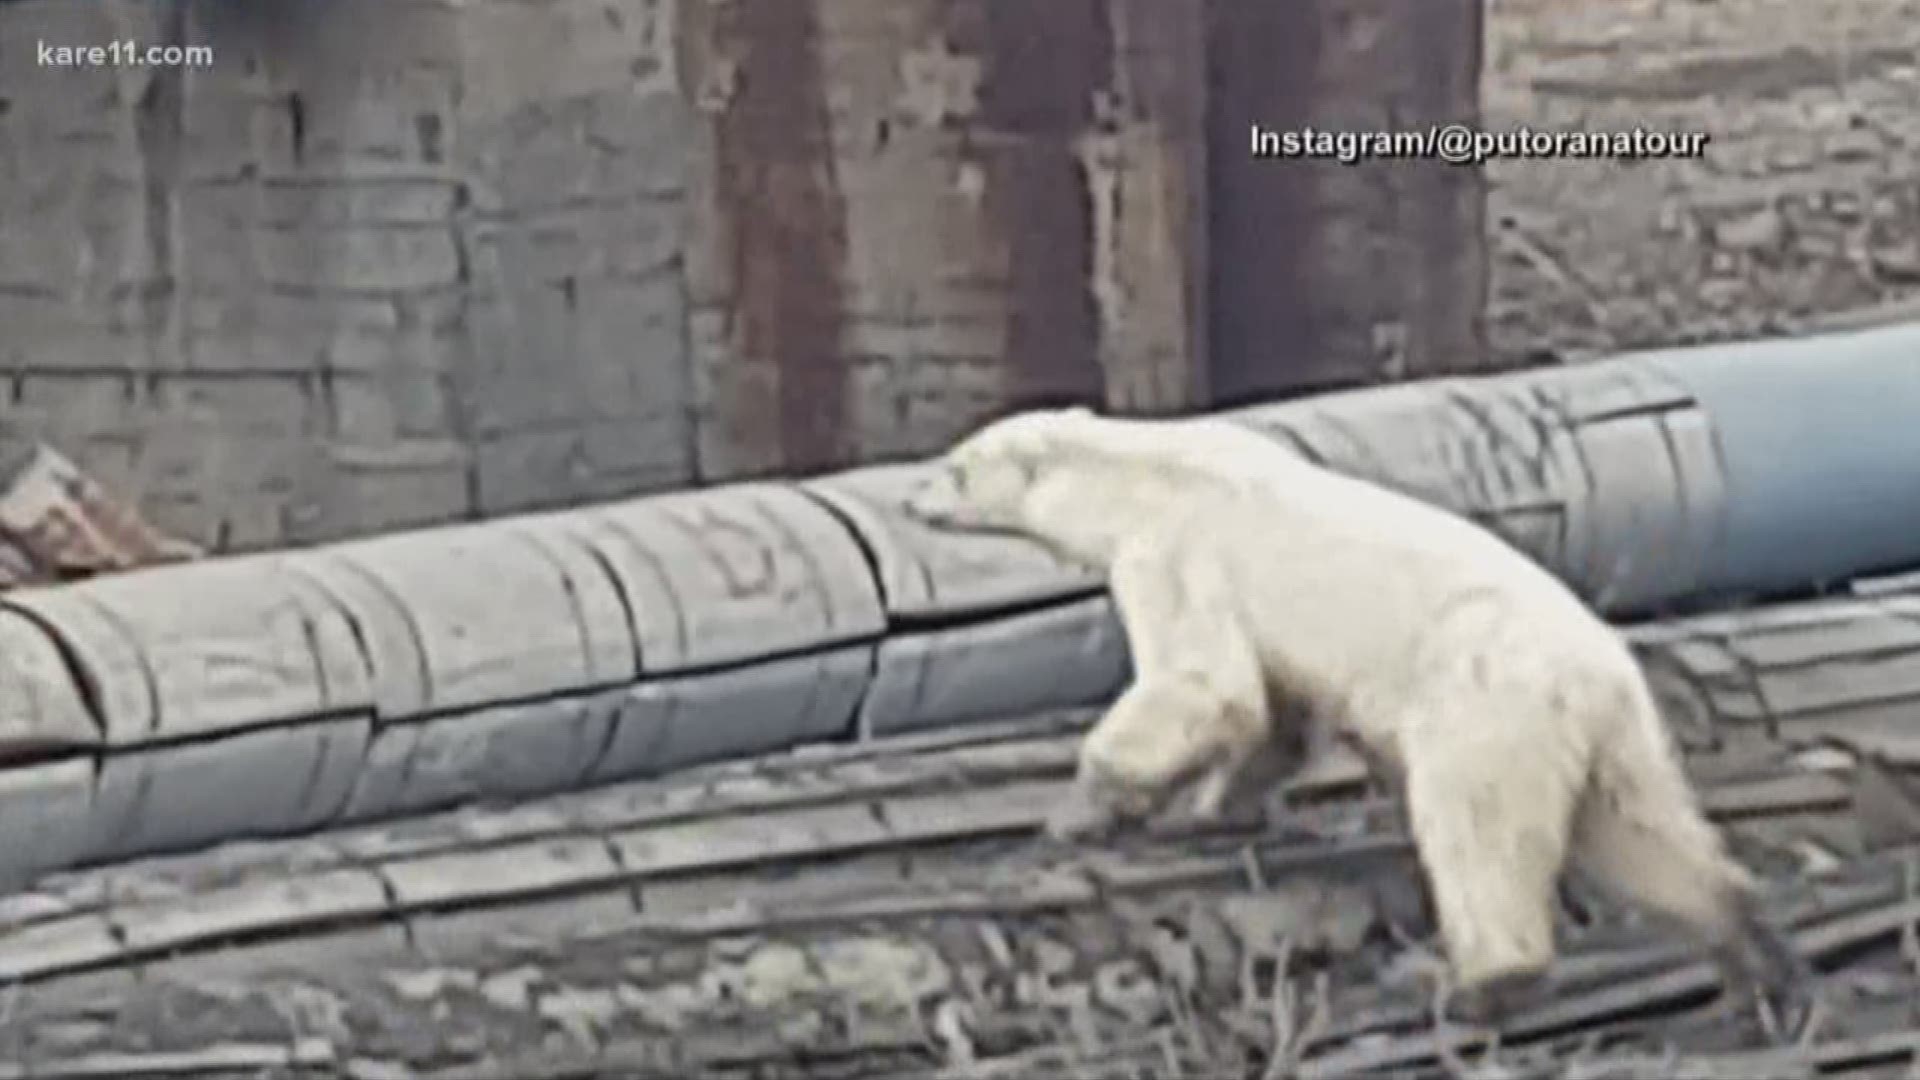 Another starving polar bear is wandering into a populated area of Siberia, looking for food and survival. KARE 11's Sven Sundgaard explains why scenes like this are happening more and more.